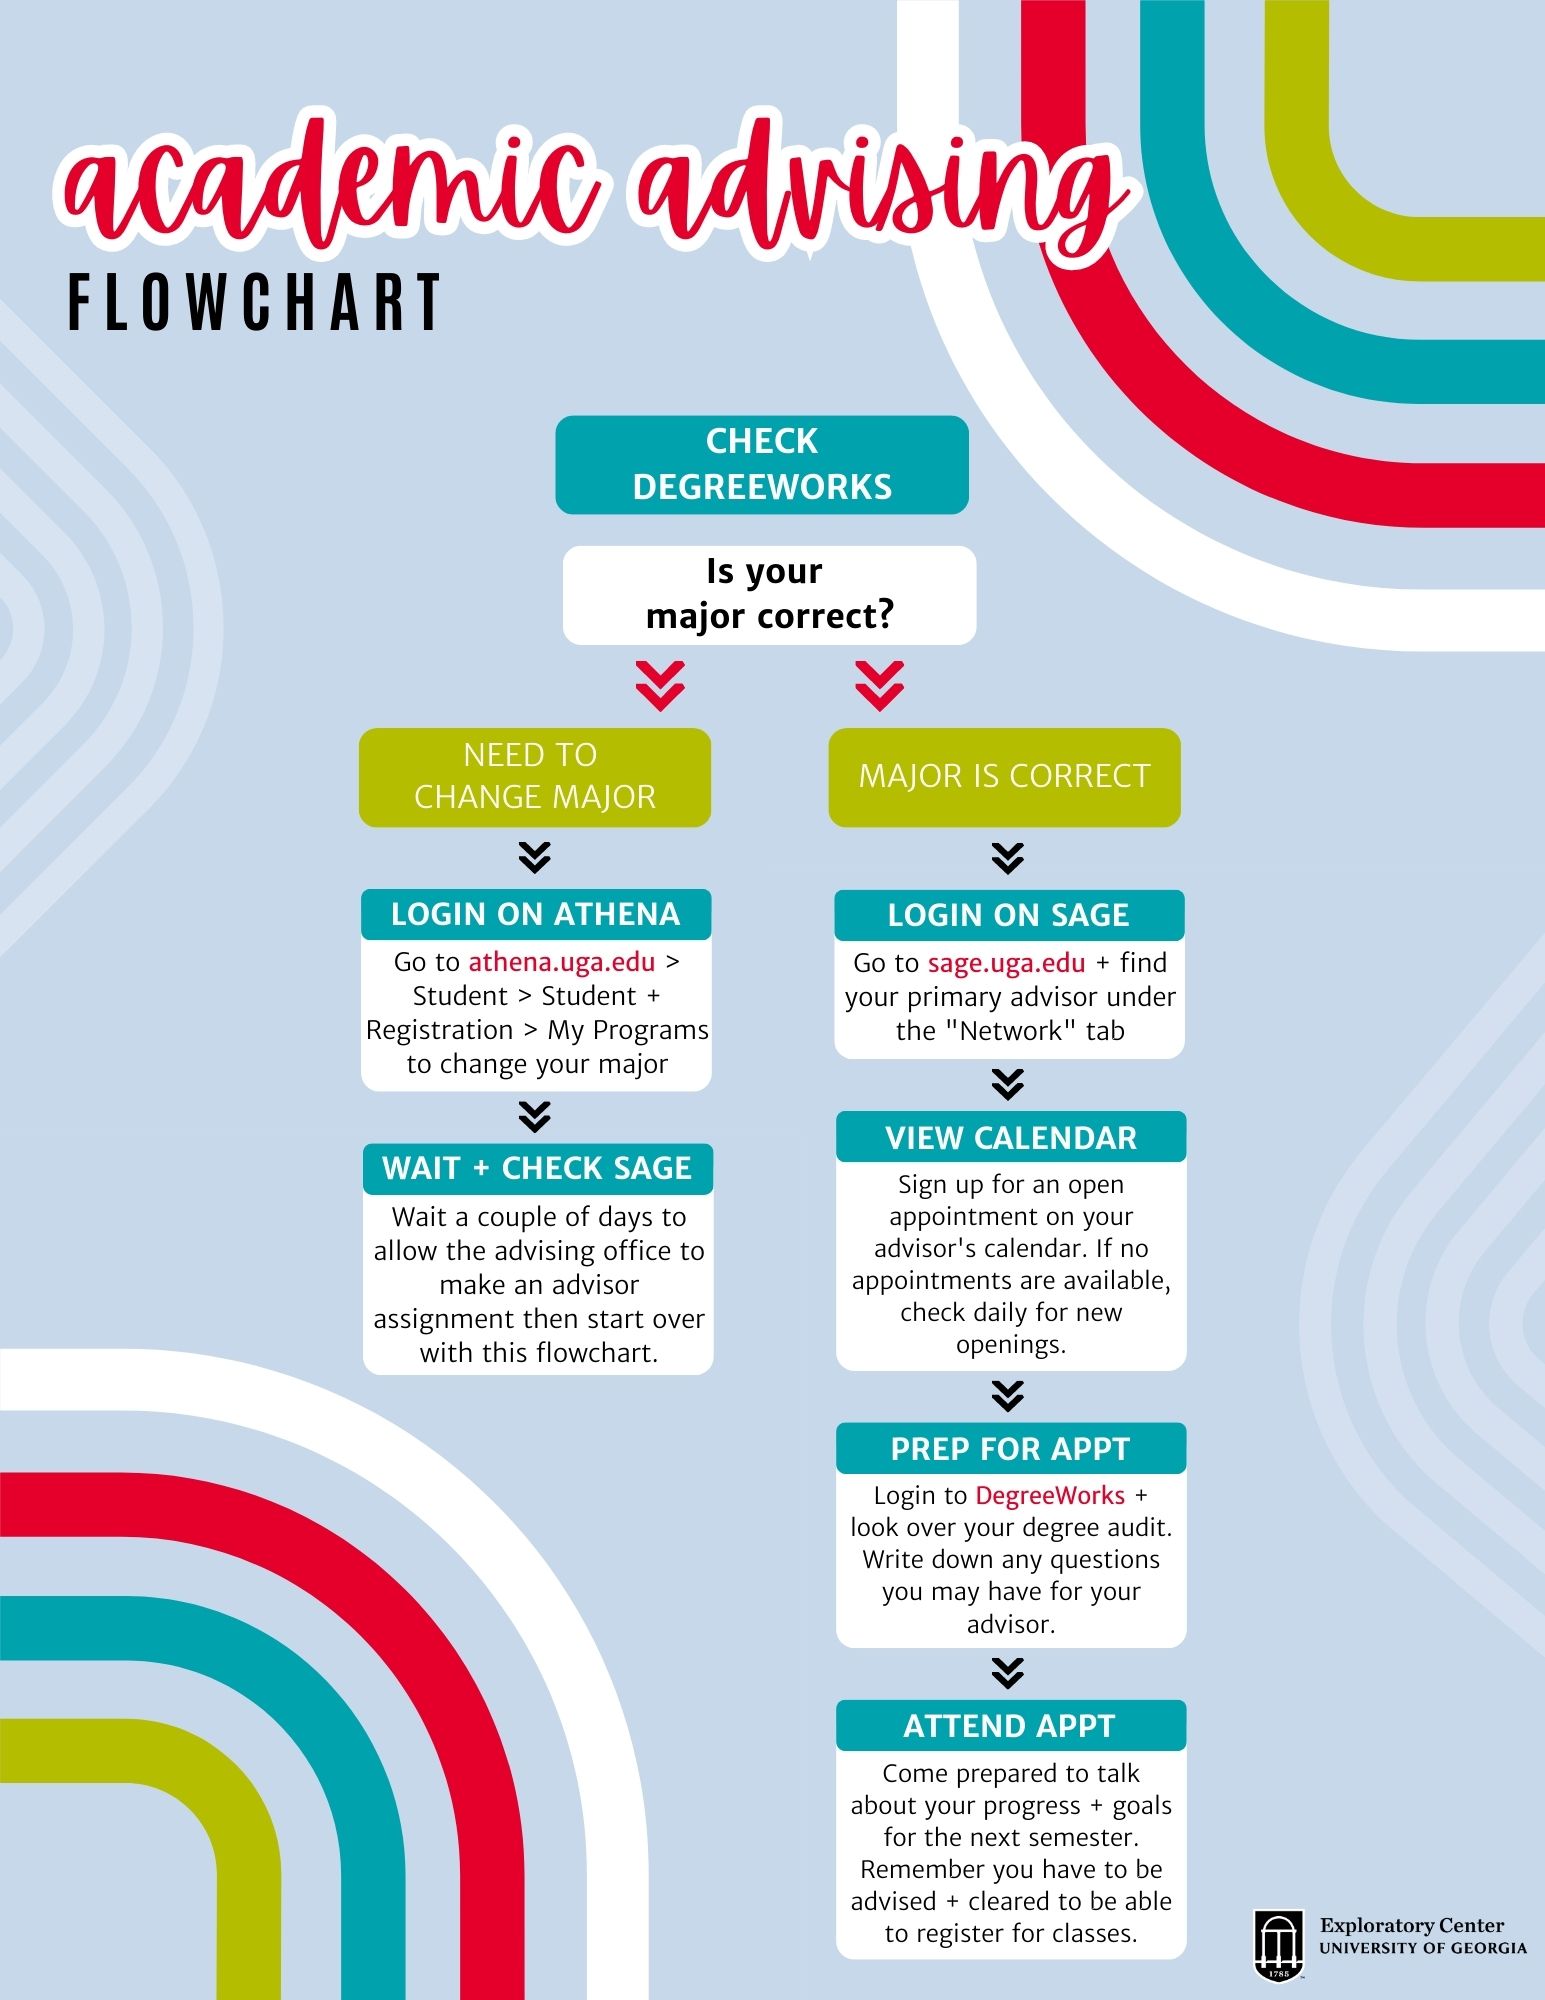 The Academic Advising Flowchart is a step-by-step guide for scheduling an advising appointment on SAGE.